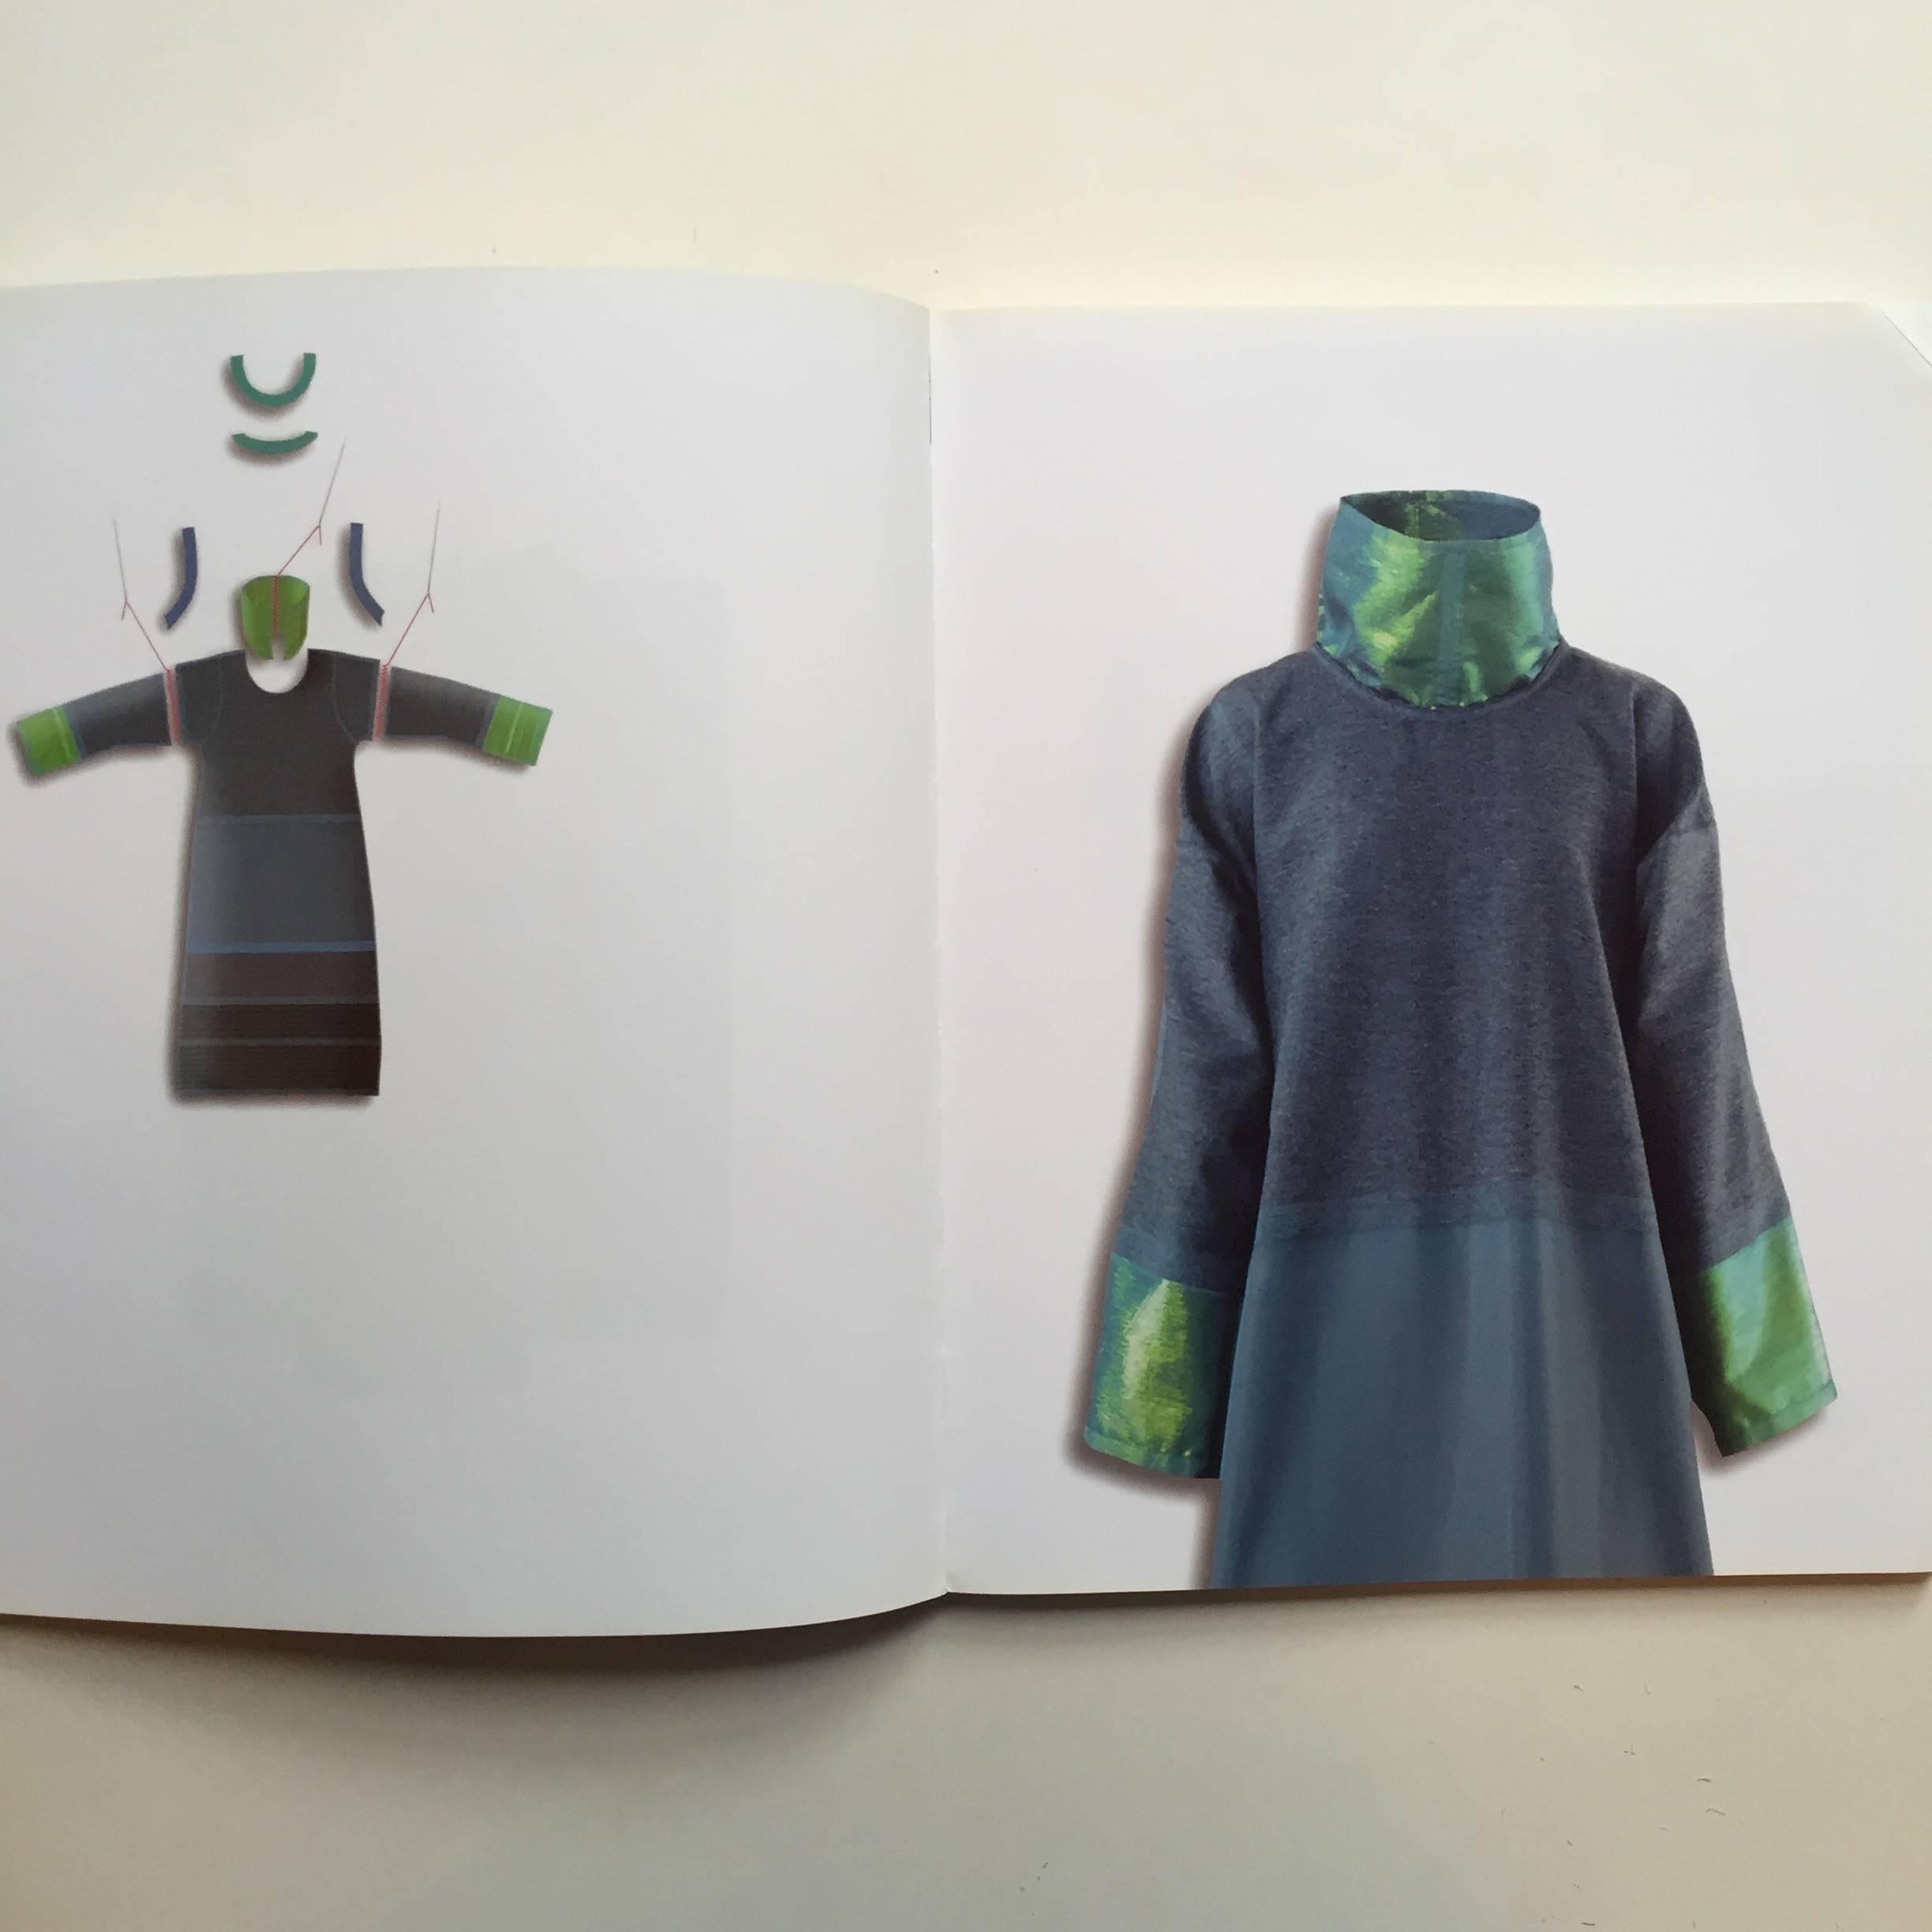 First edition, published by Vitra Design Museum, 2002.

Published in conjunction with an exhibition held at Vitra Design Museum, Berlin, in 2001.

A-POC is an acronym for “A Piece of Cloth”, also referring to the word ‘epoch’. This publication